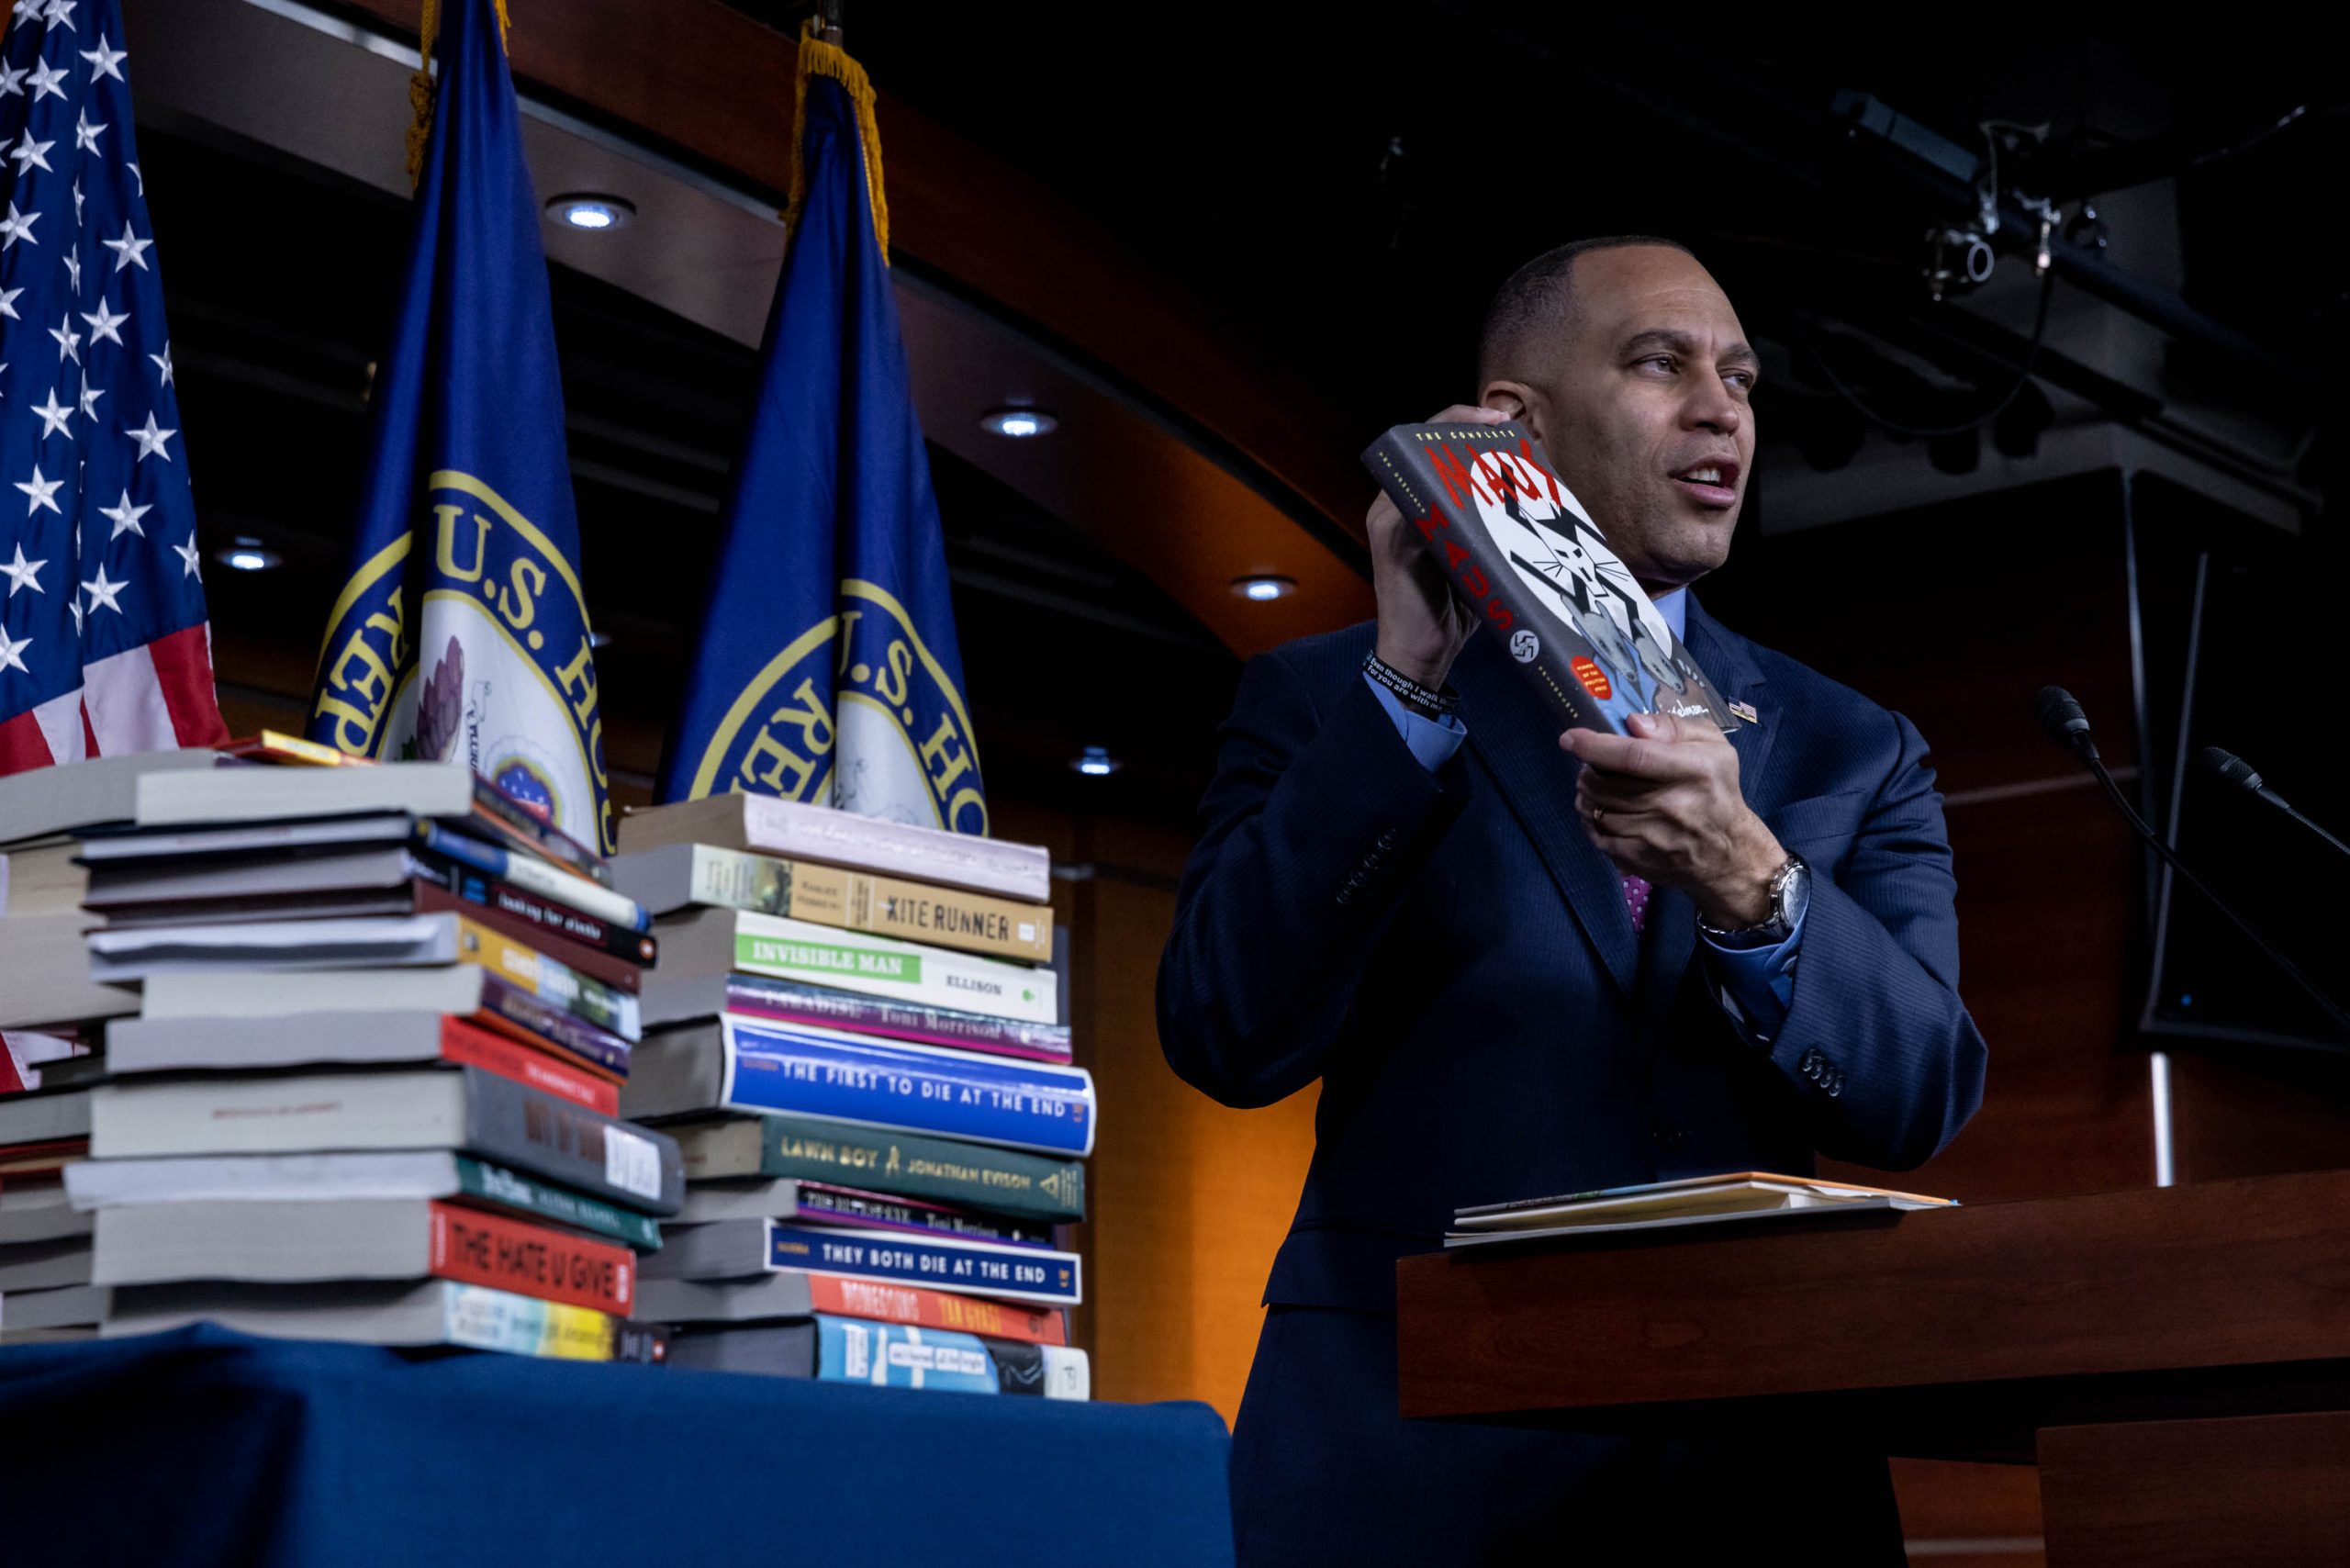 House Democratic Leader Hakeem Jeffries (D-NY) holds a copy of the graphic novel, Maus, while speaking at a press conference about banned books, on Capitol Hill, Friday, March 24, 2023. While speaking on the House floor, Jeffries said "Extreme MAGA Republicans don't want the children of America to learn about the Holocaust."